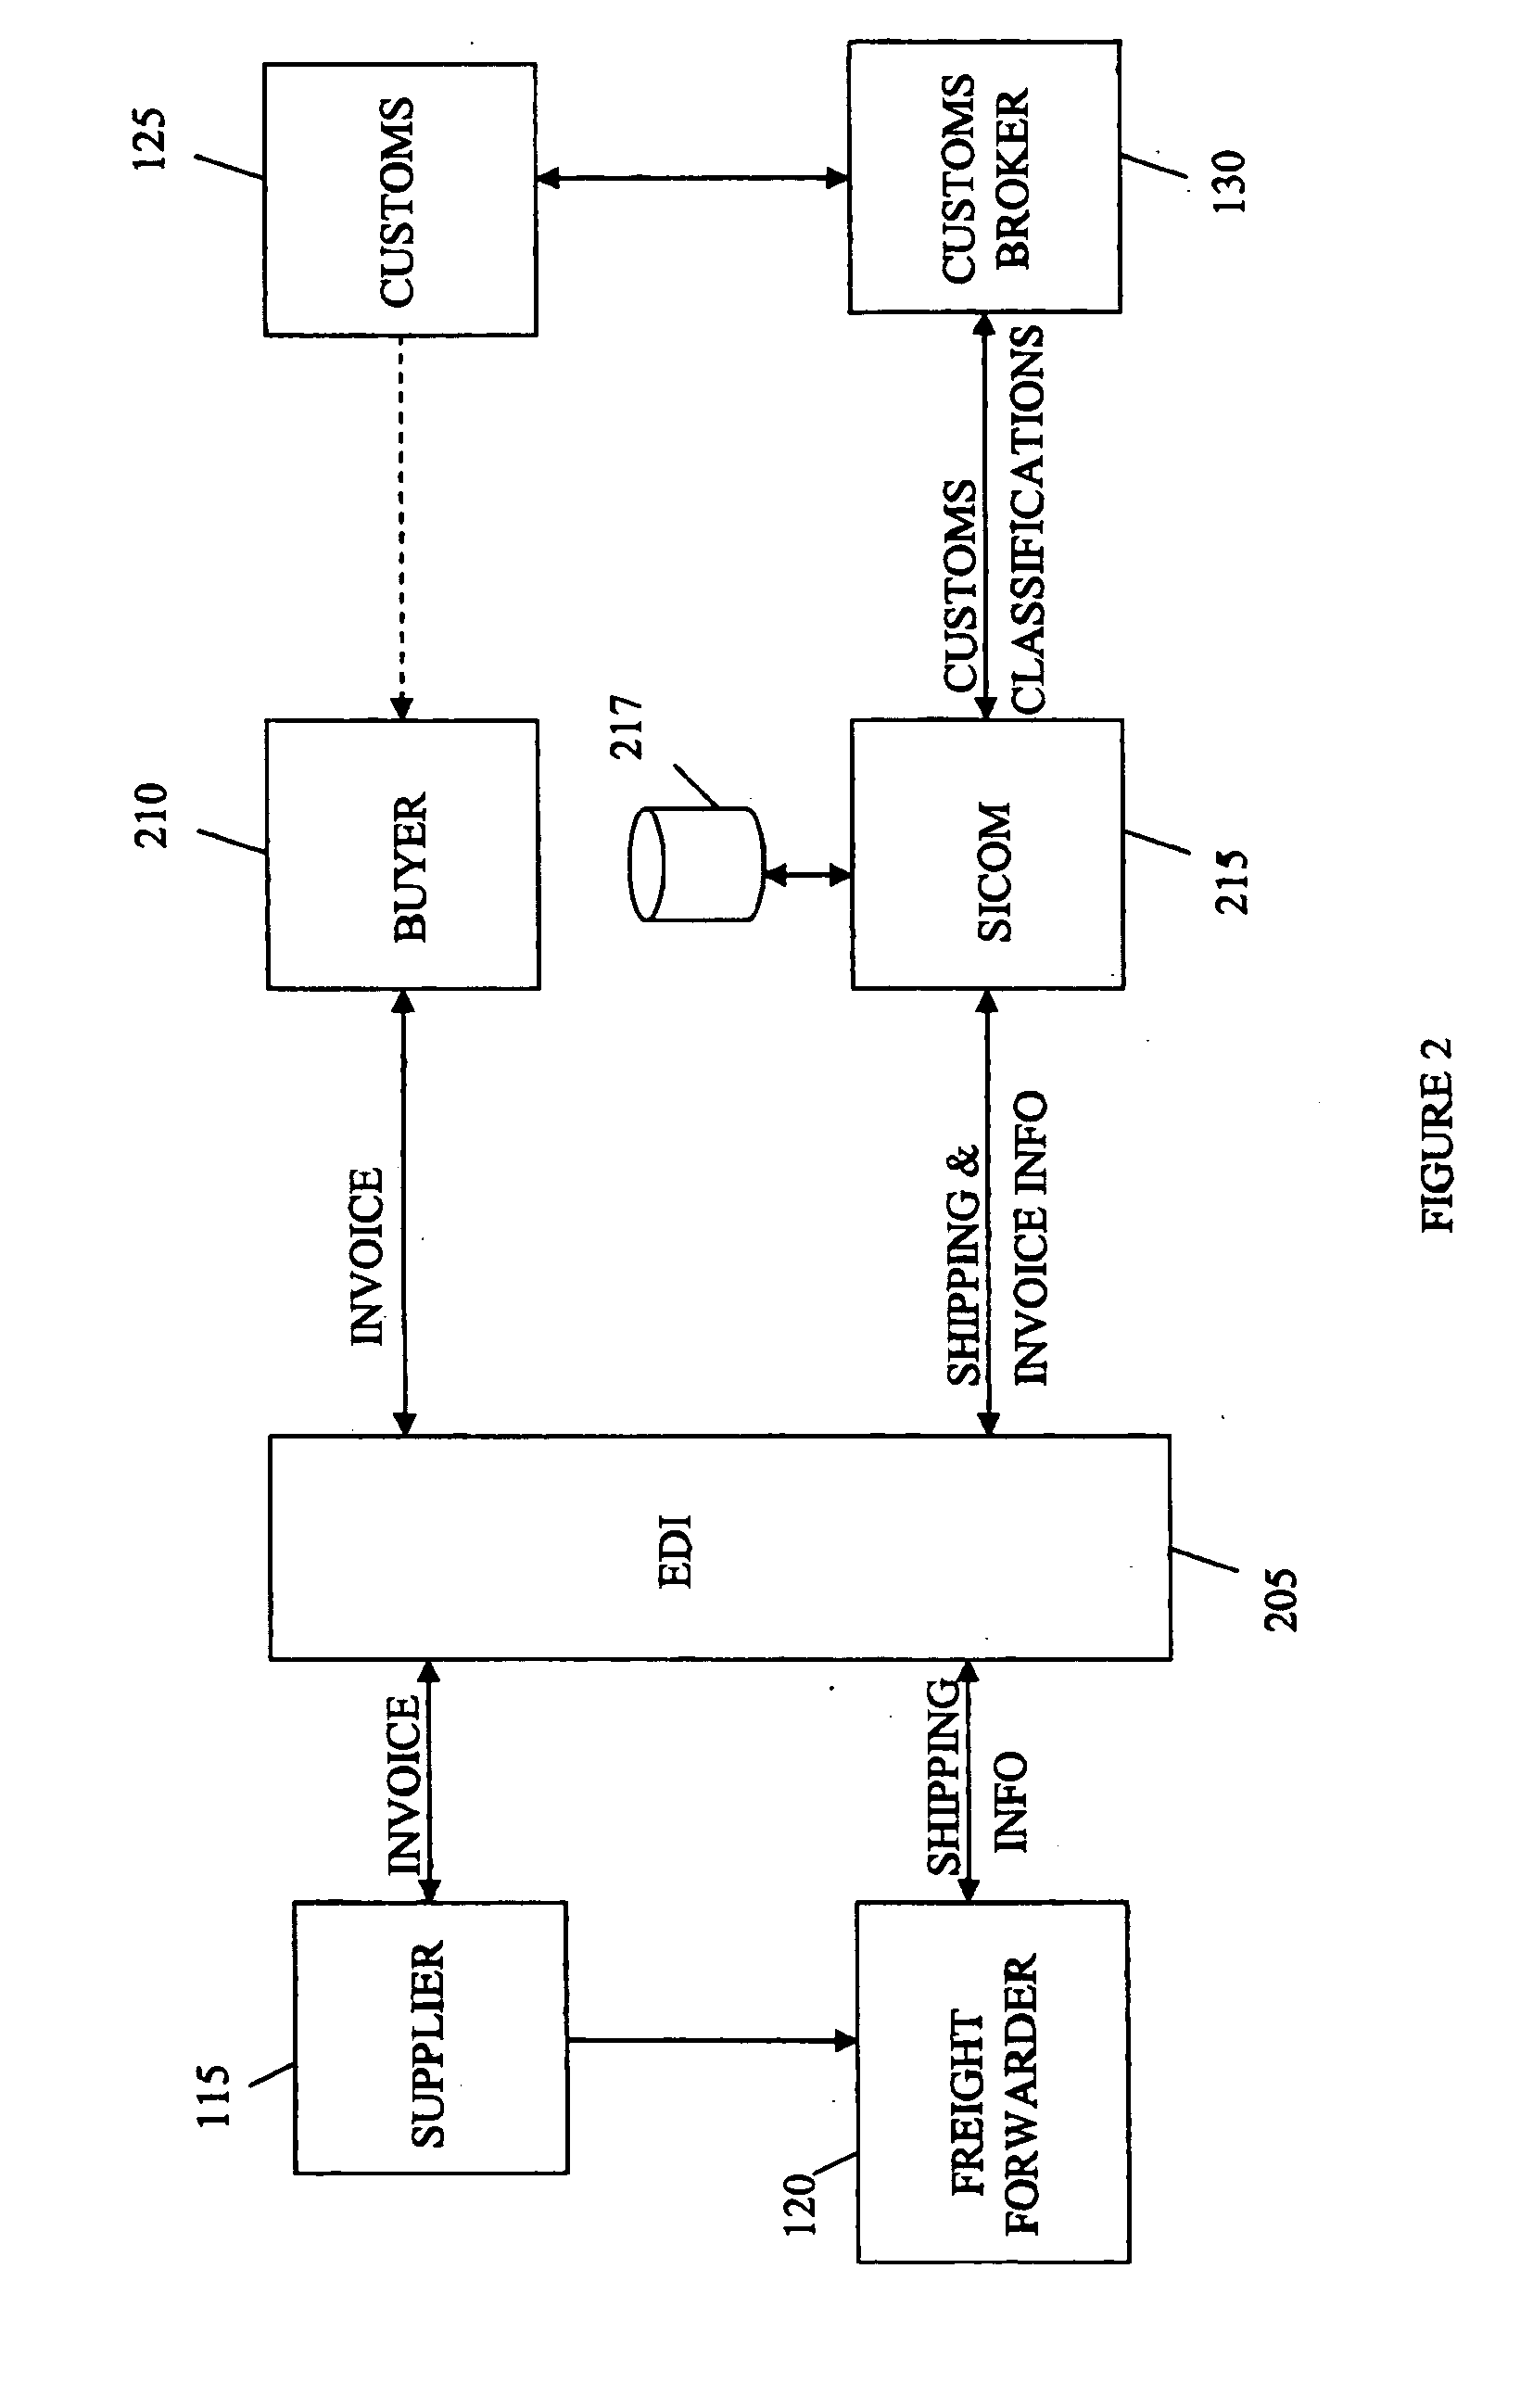 Import compliance system and method